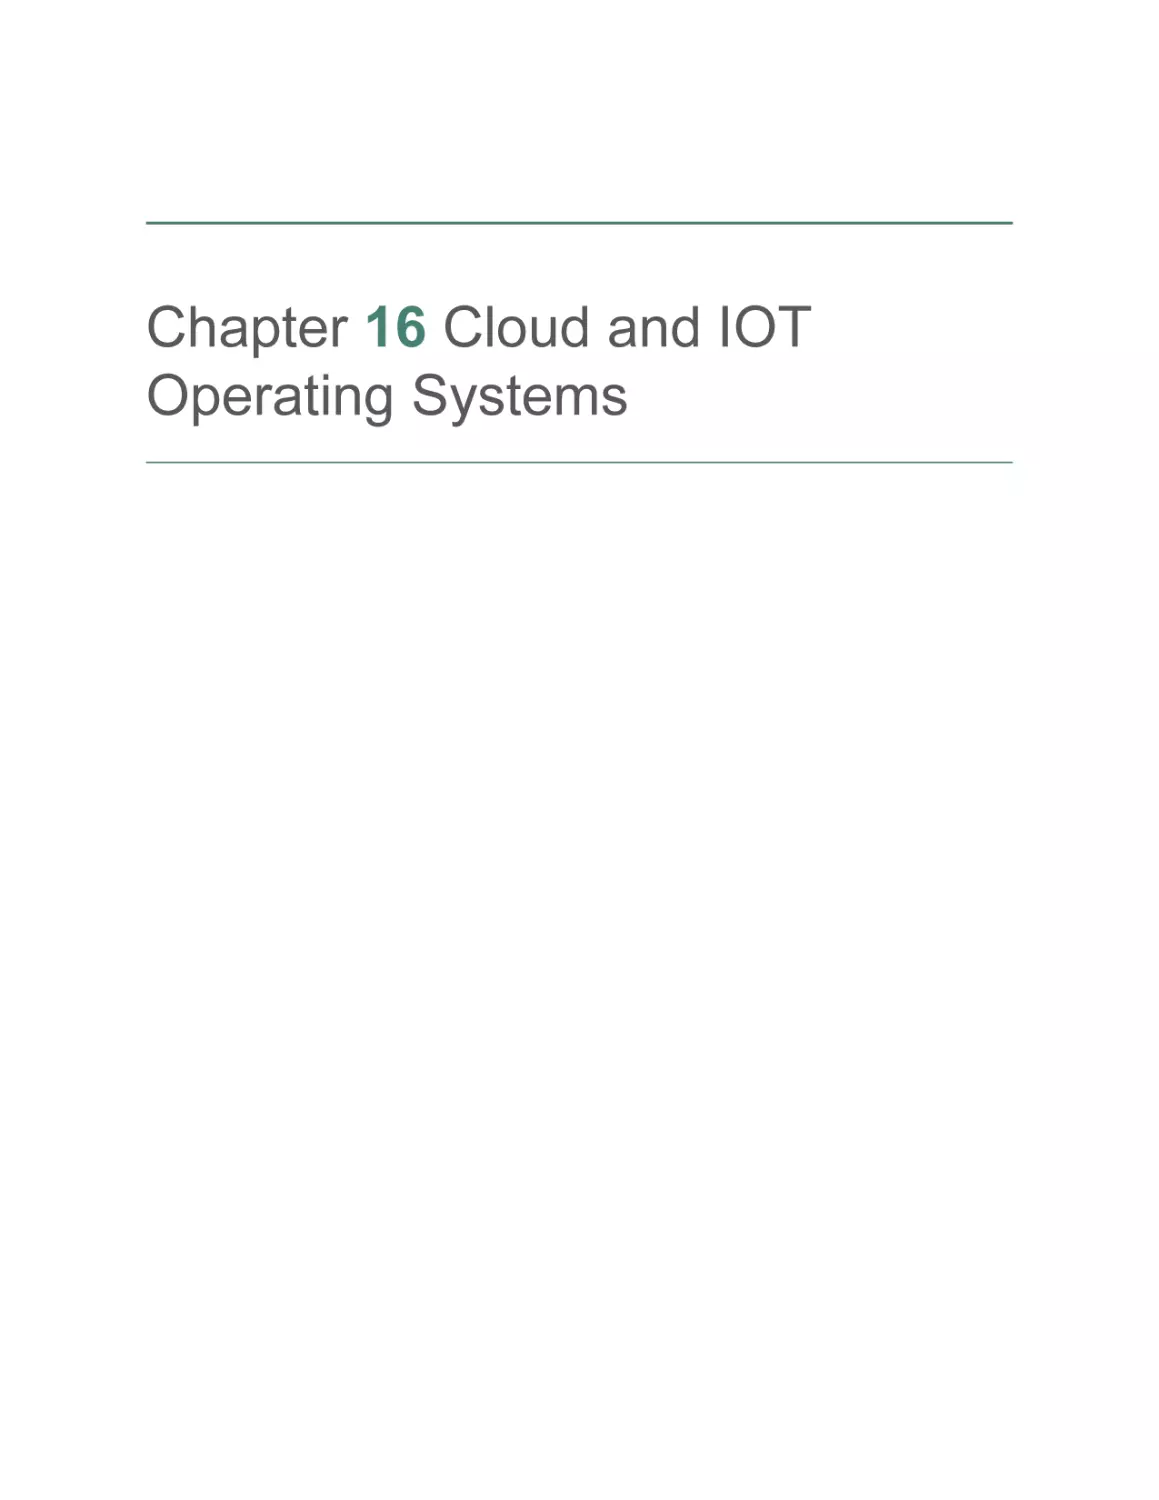 Chapter 16 Cloud and IOT Operating Systems